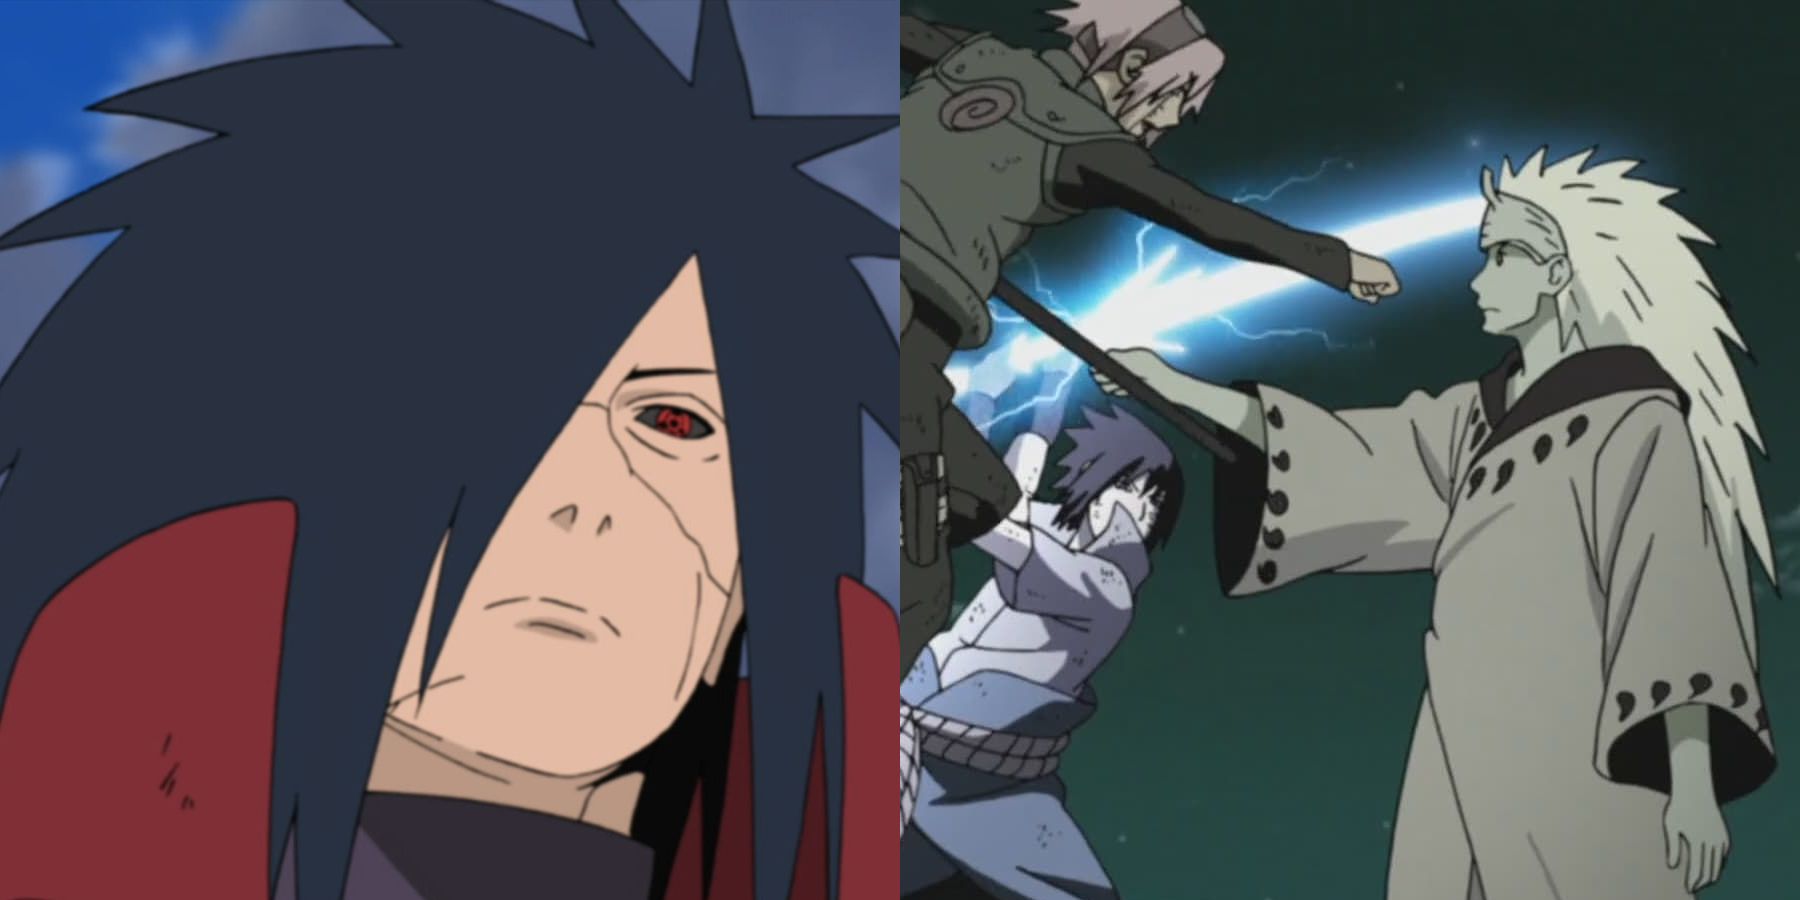 How powerful is Madara Uchiha in Naruto? How far can he go against